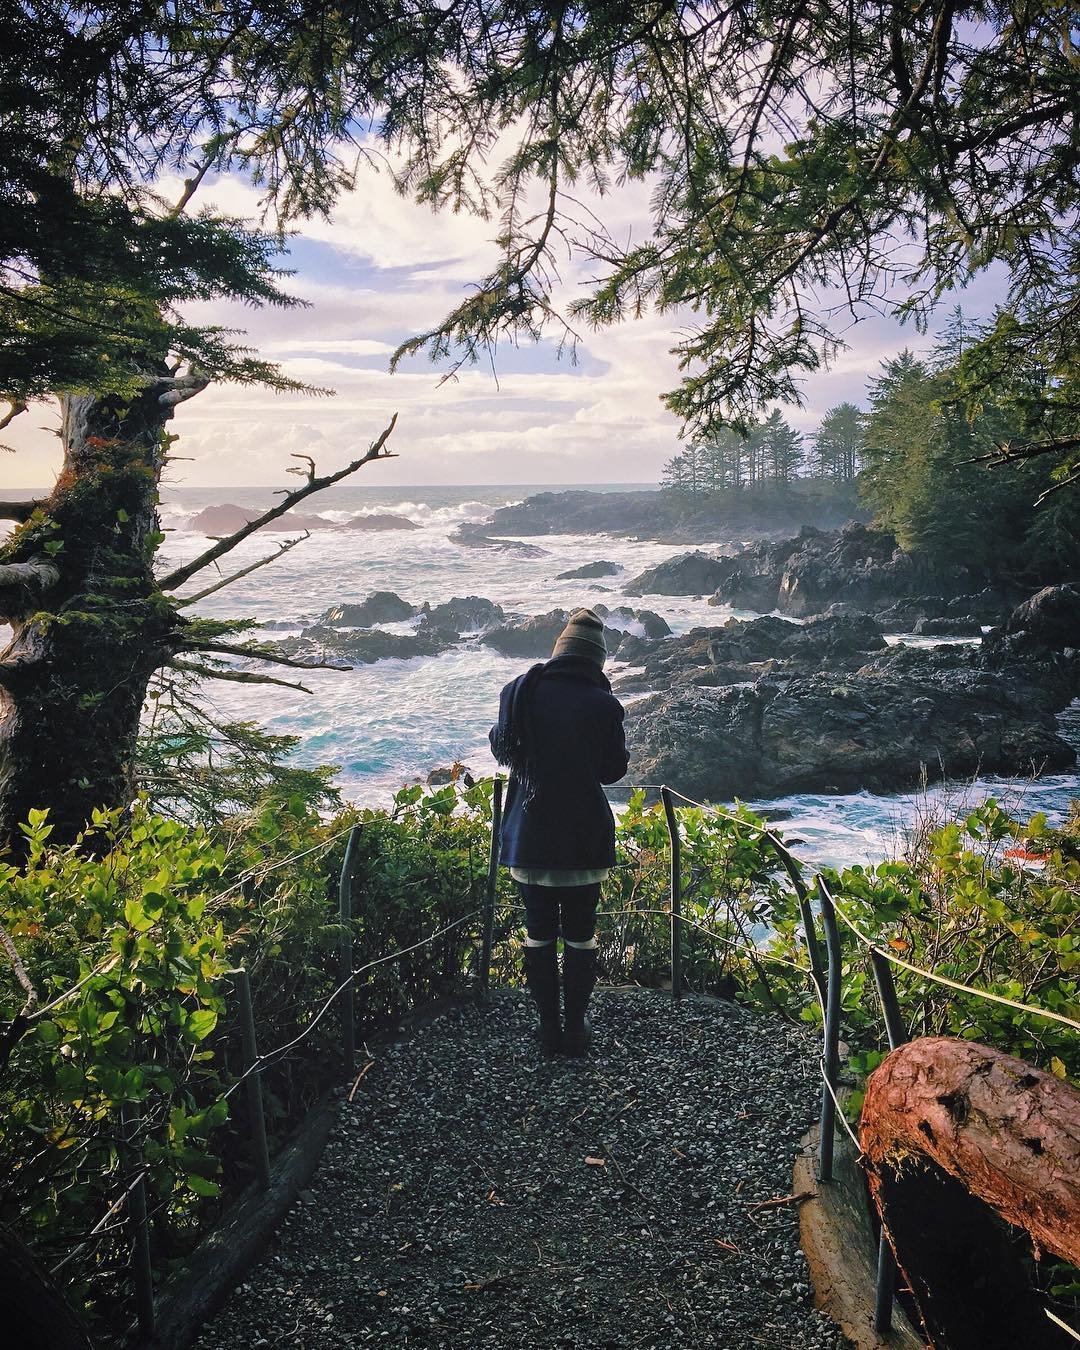 A person looks out at the ocean from a lookout on the Wild Pacific Trail